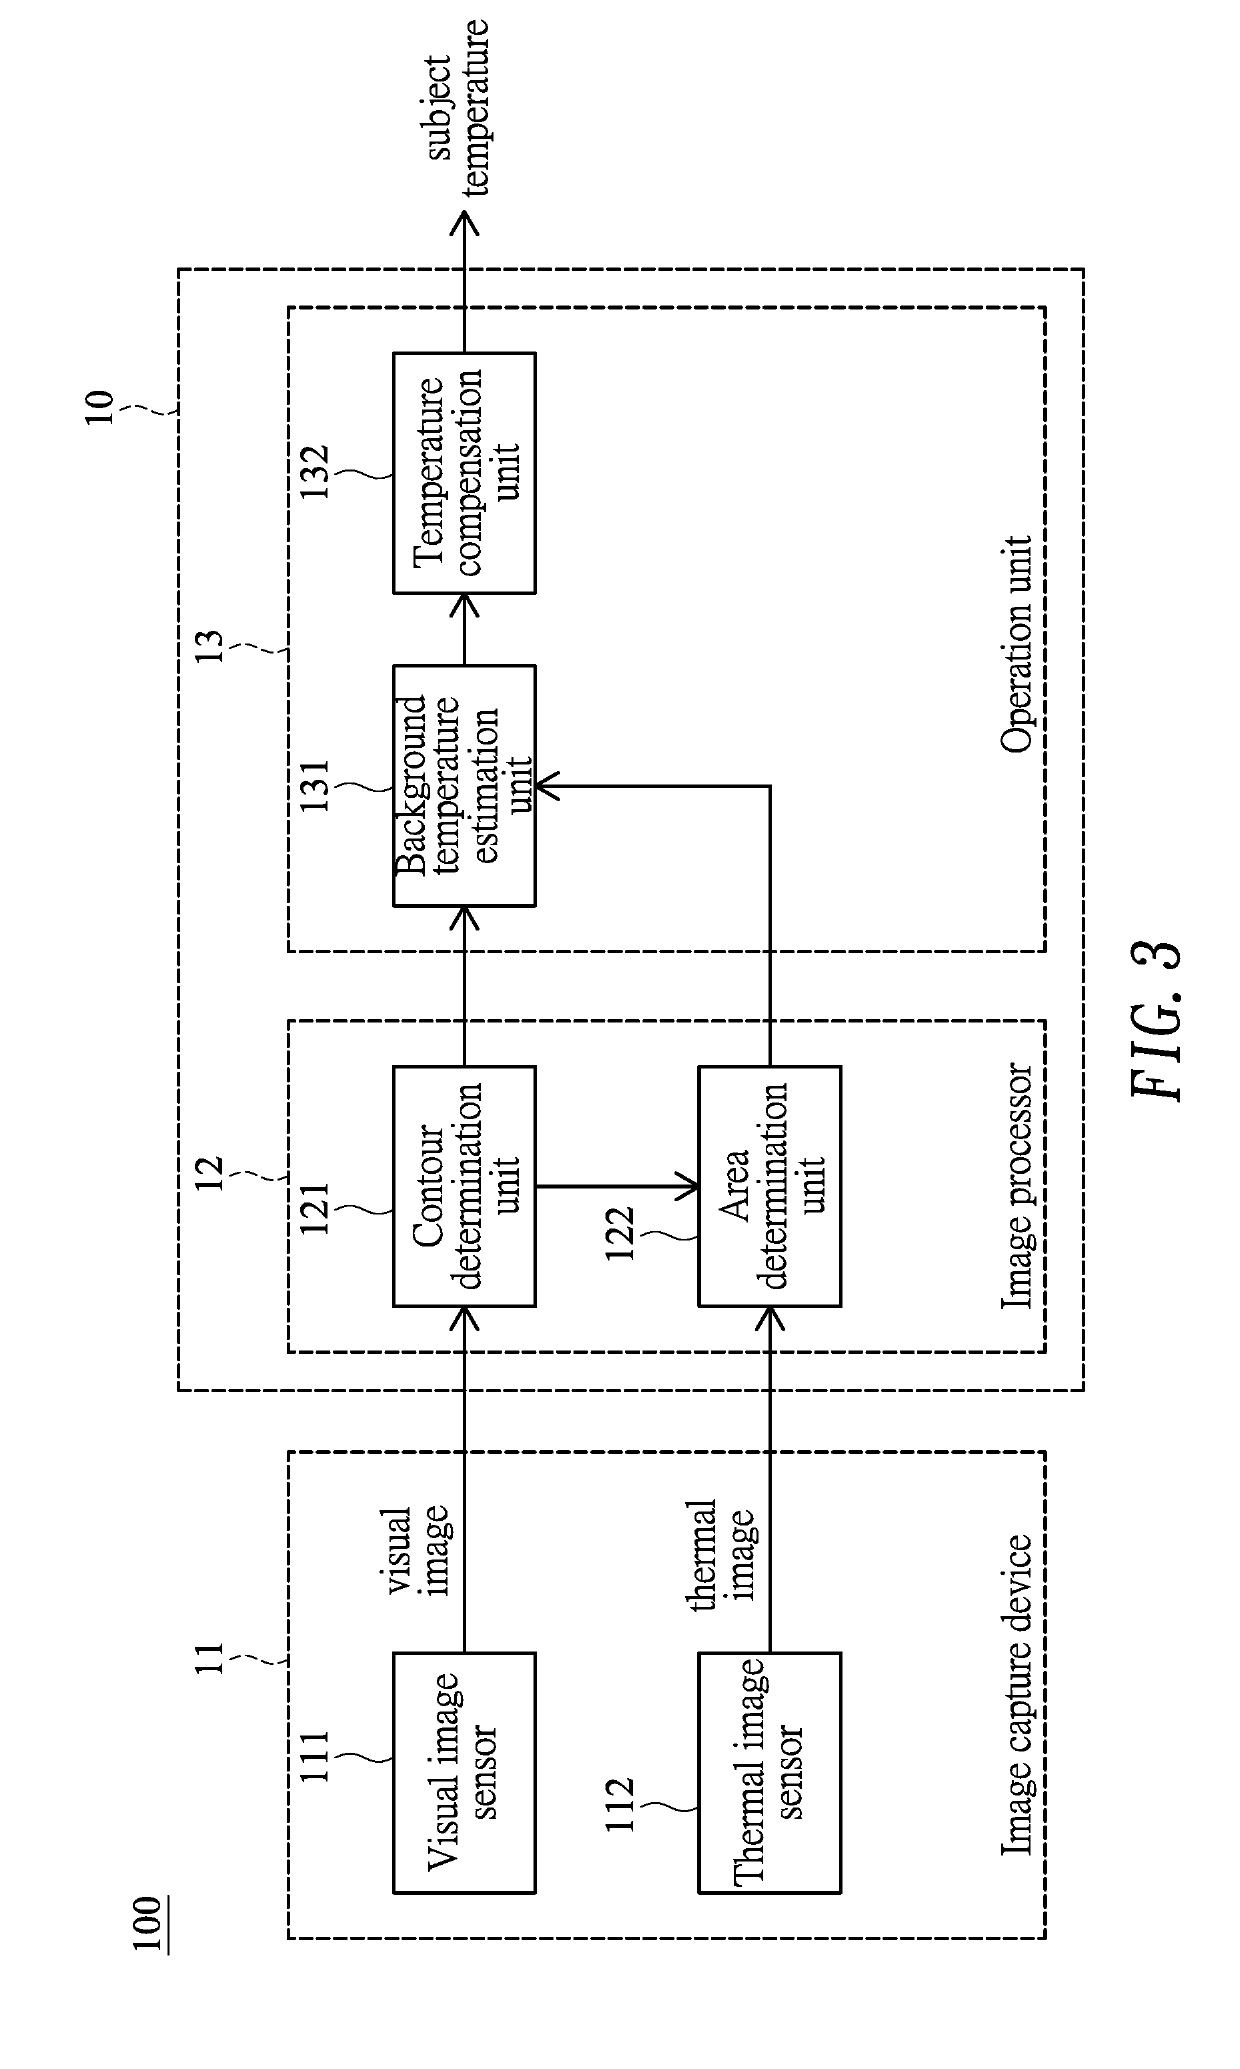 Thermal image processing system and method